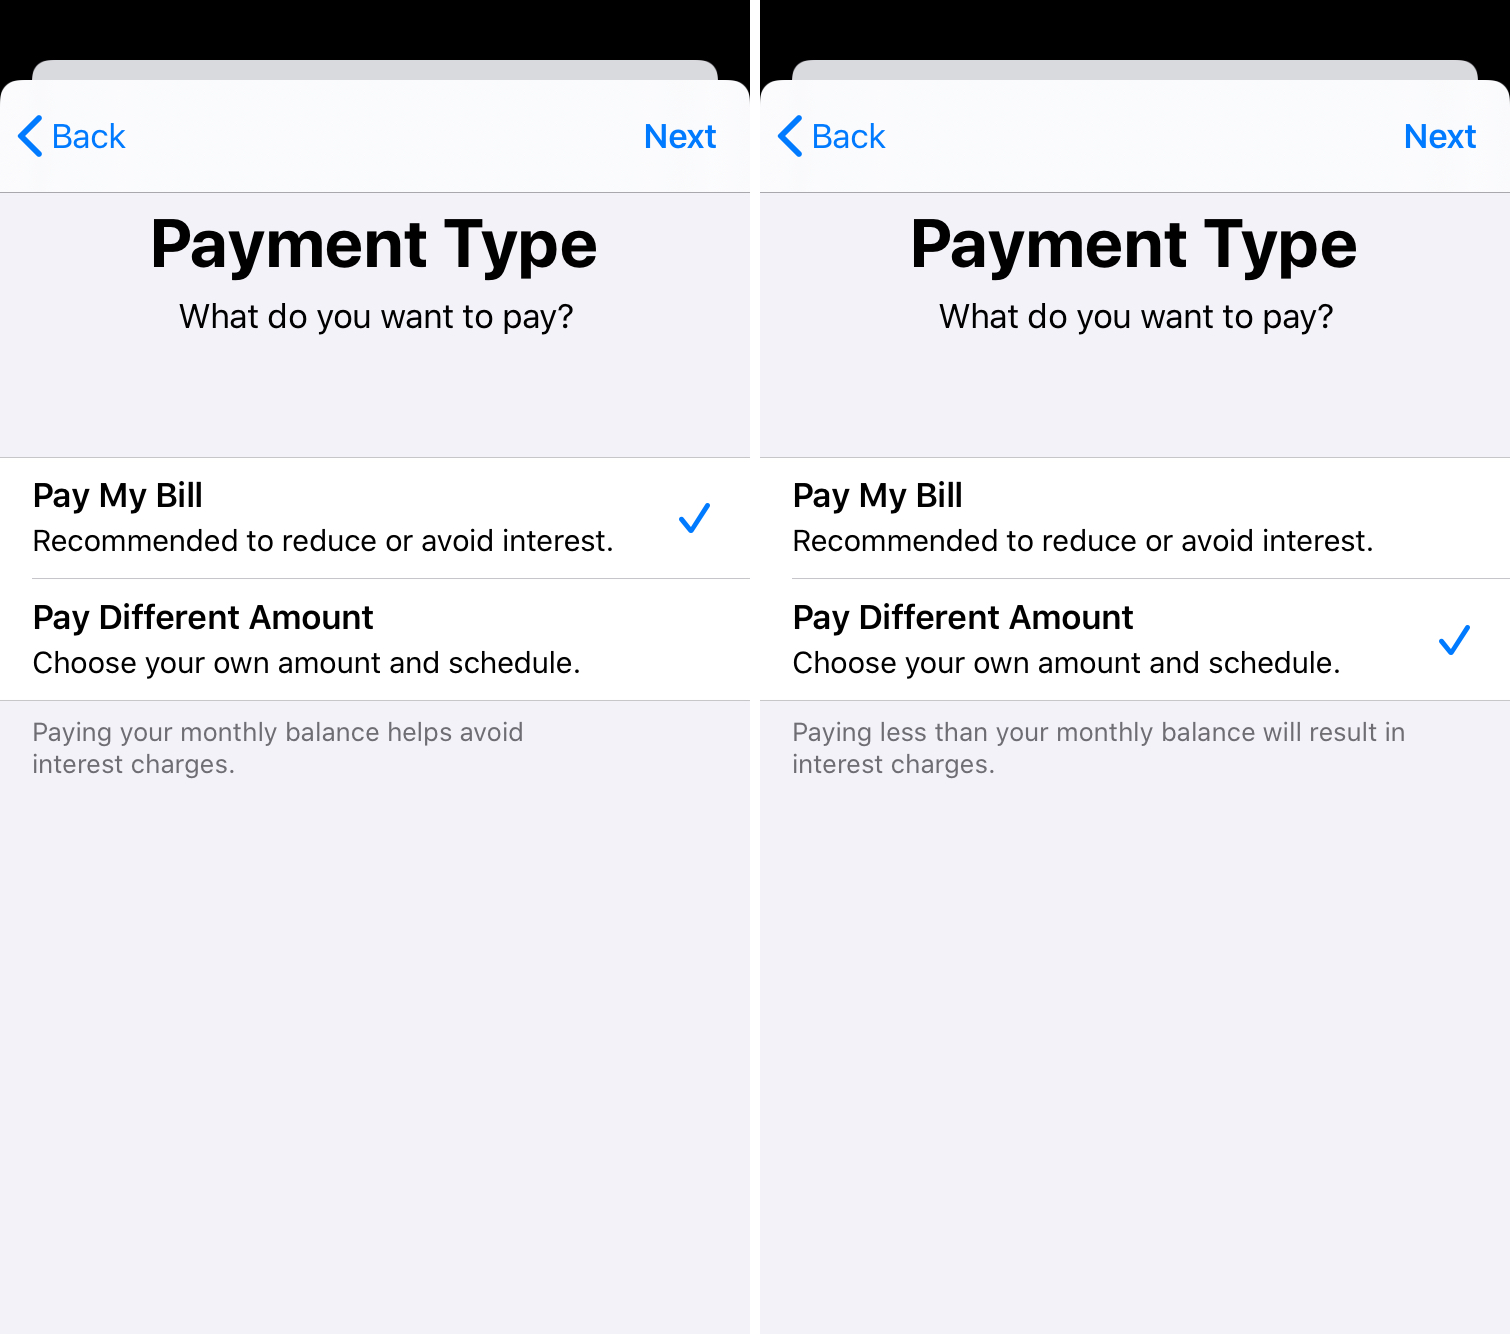 Payment Type for Apple Card